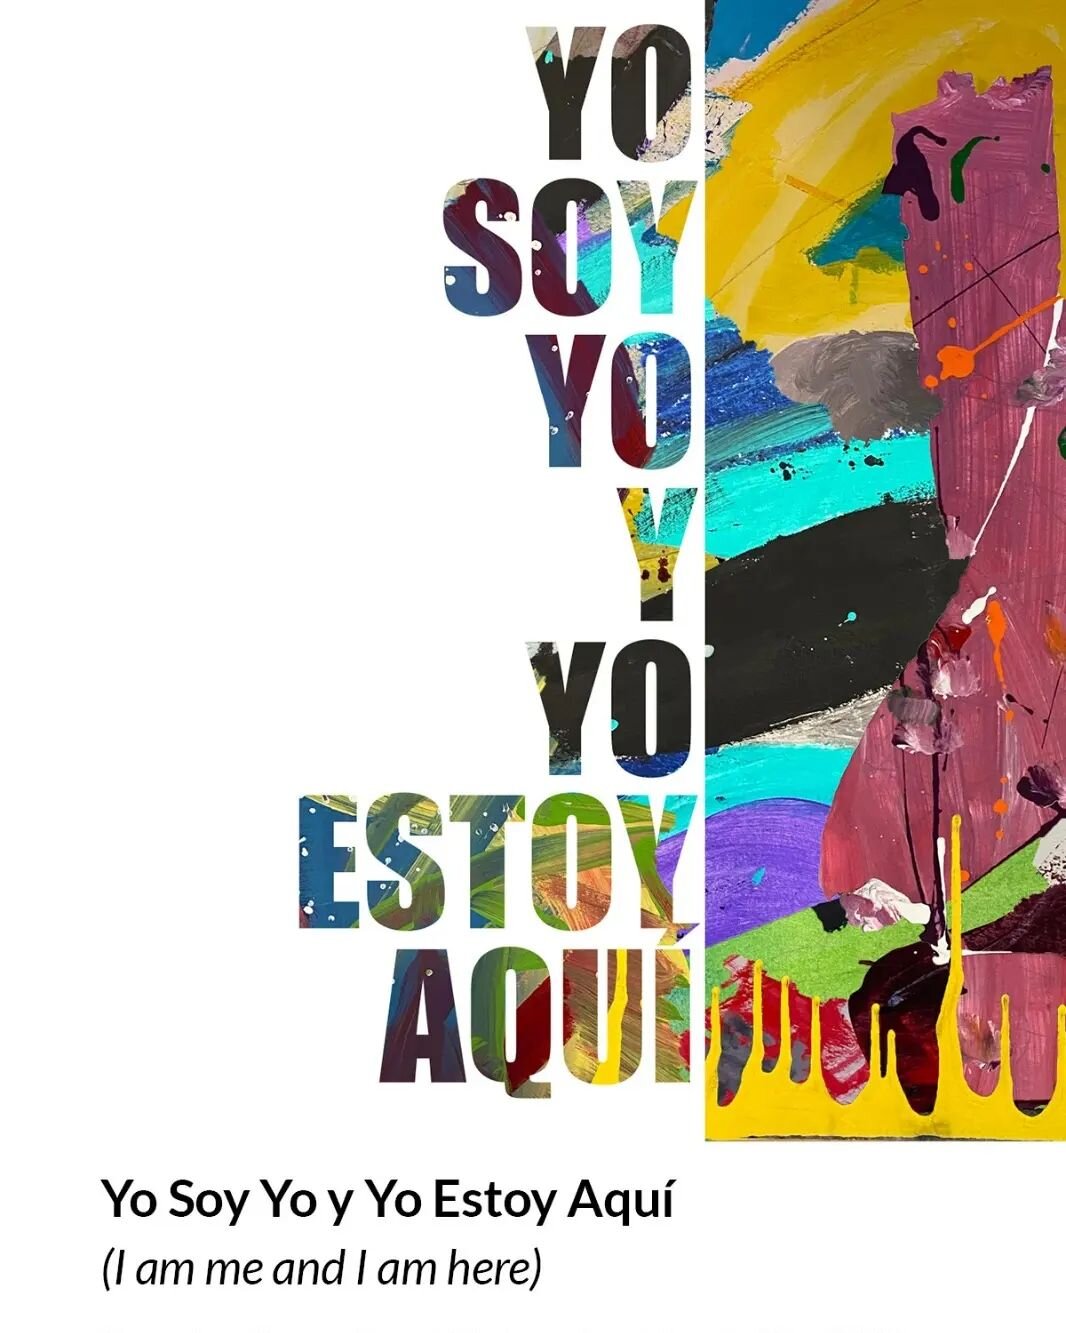 Dear friends, 

We are pleased to invite you to join us for the opening of our art exhibit called Yo Soy Yo y Estoy Aqu&iacute; (I am me and I am here) this Wednesday March 8, 2023 from 6pm to 8pm at the Britannia Art Gallery (1661 Napier St., Vancou